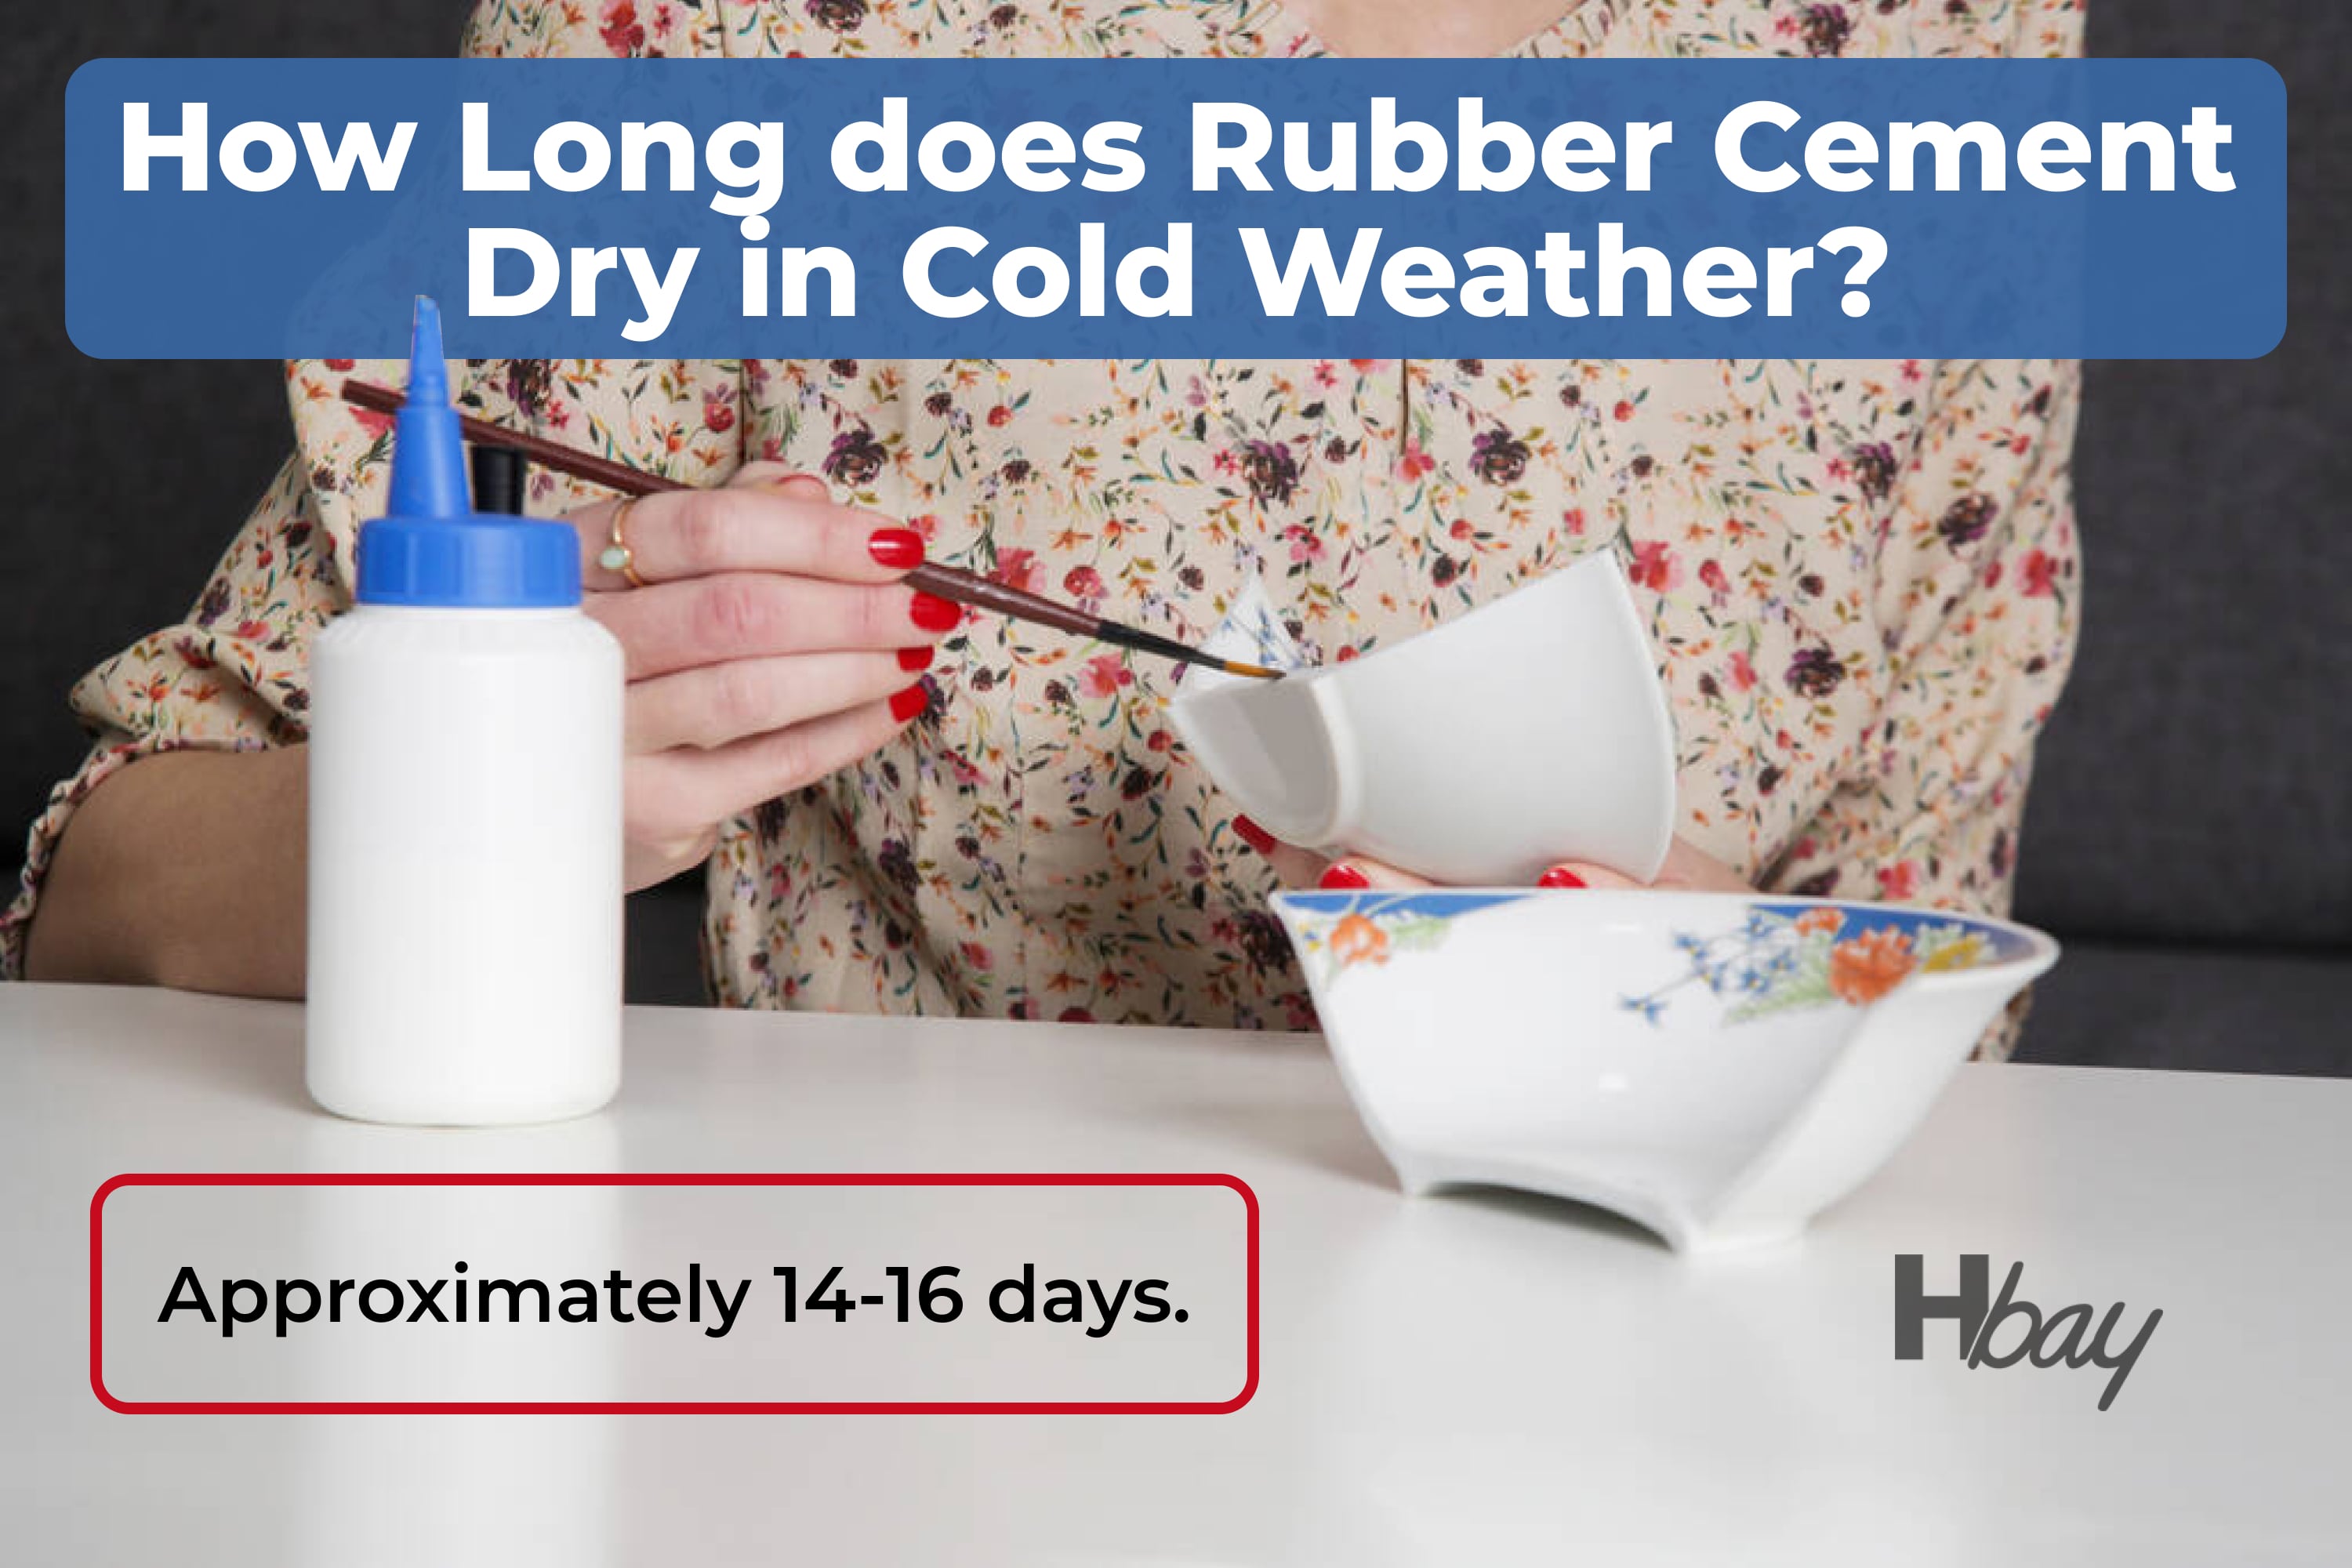 How long does rubber cement dry in cold weather